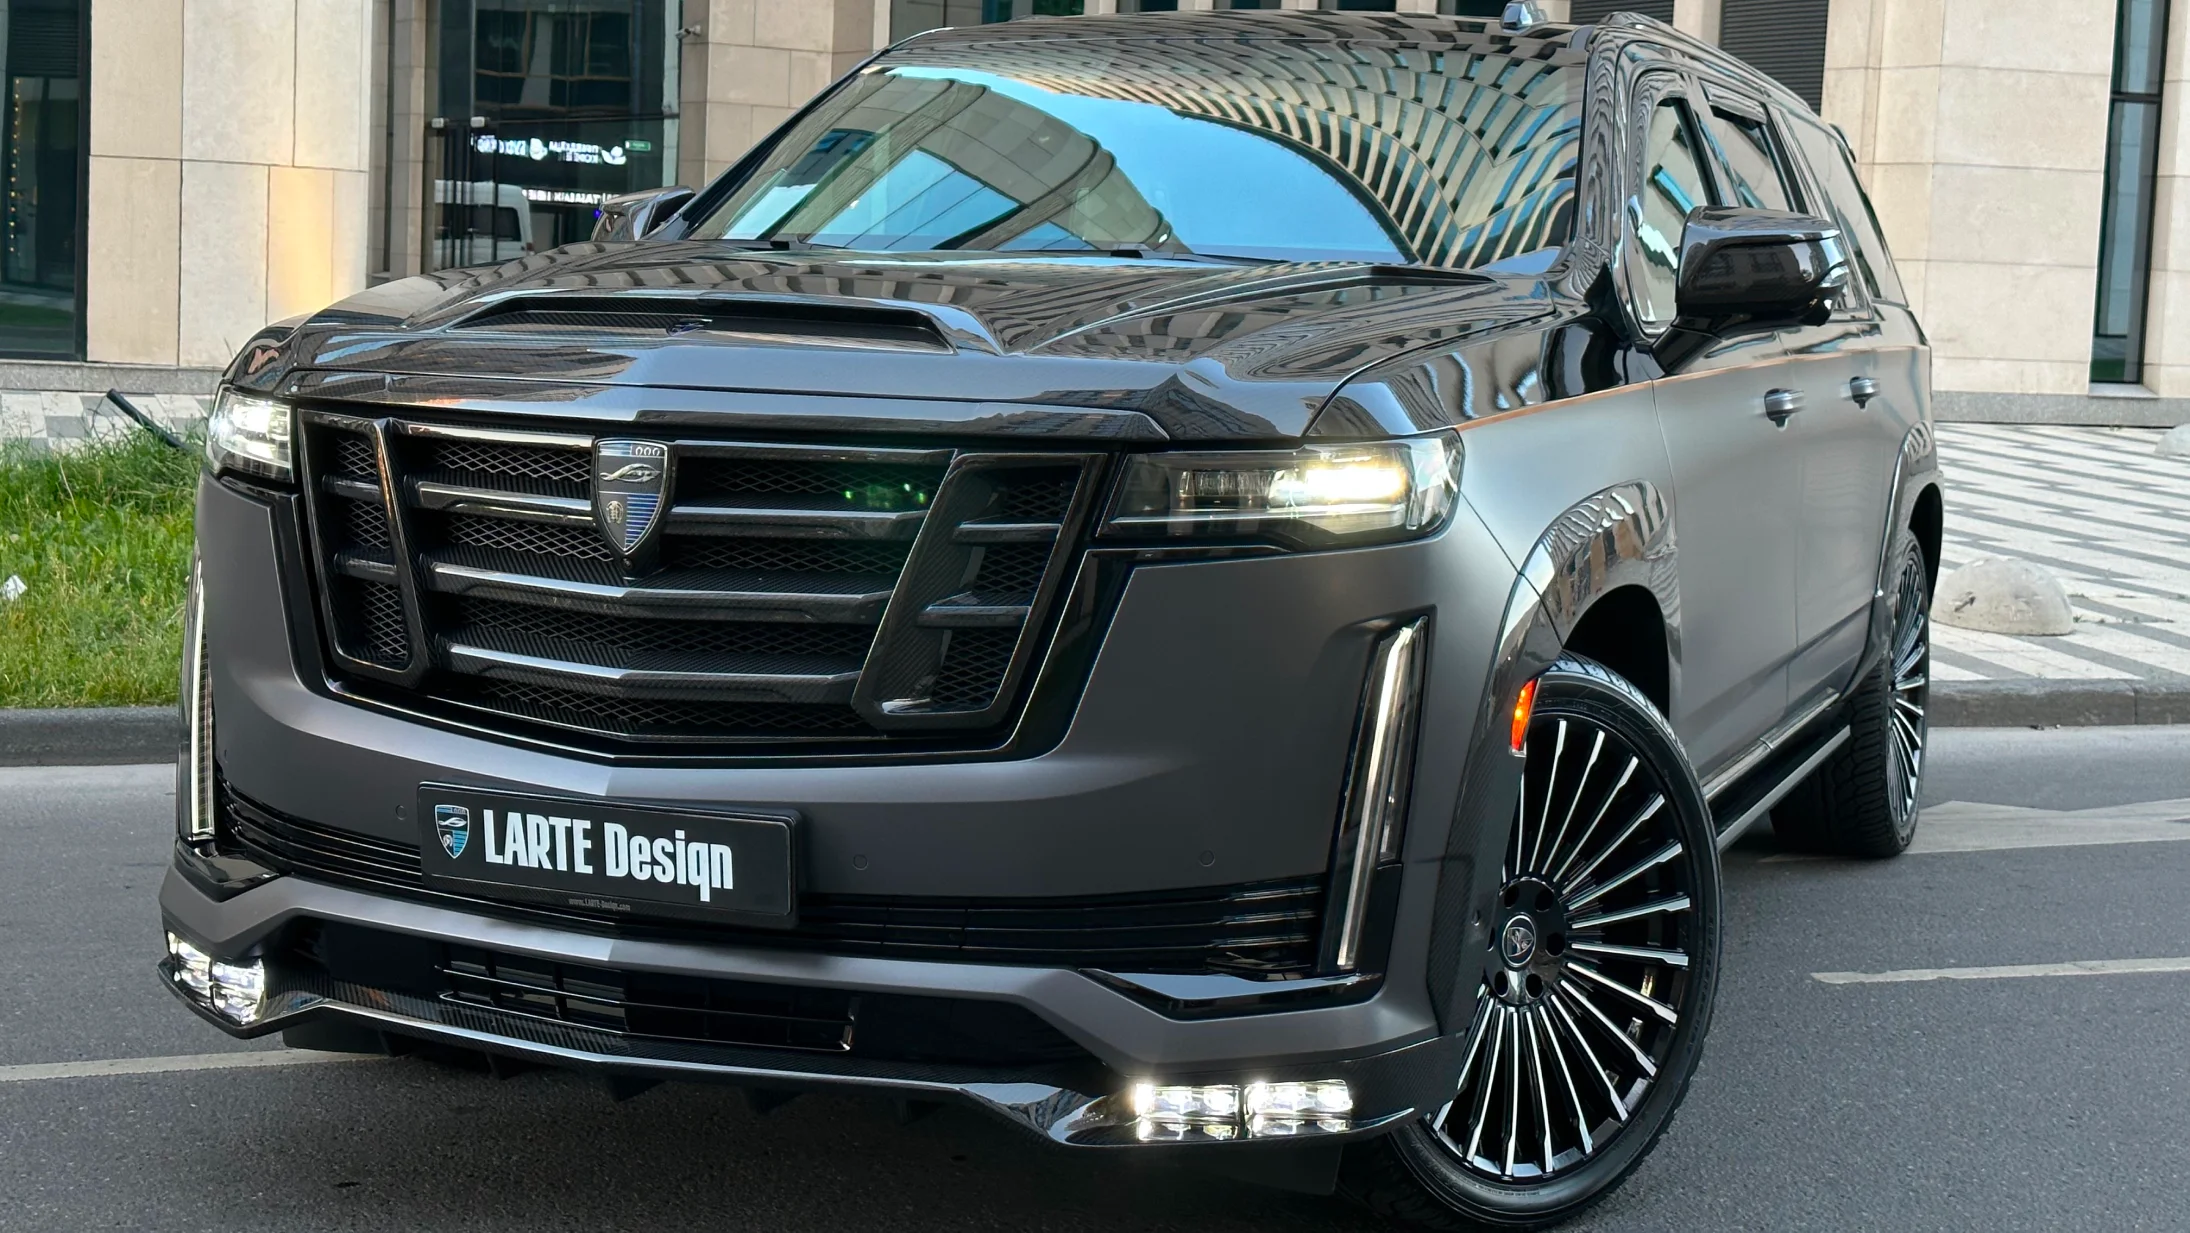 Front angle view on a Cadillac Escalade with a body kit giving the car a custom appearance